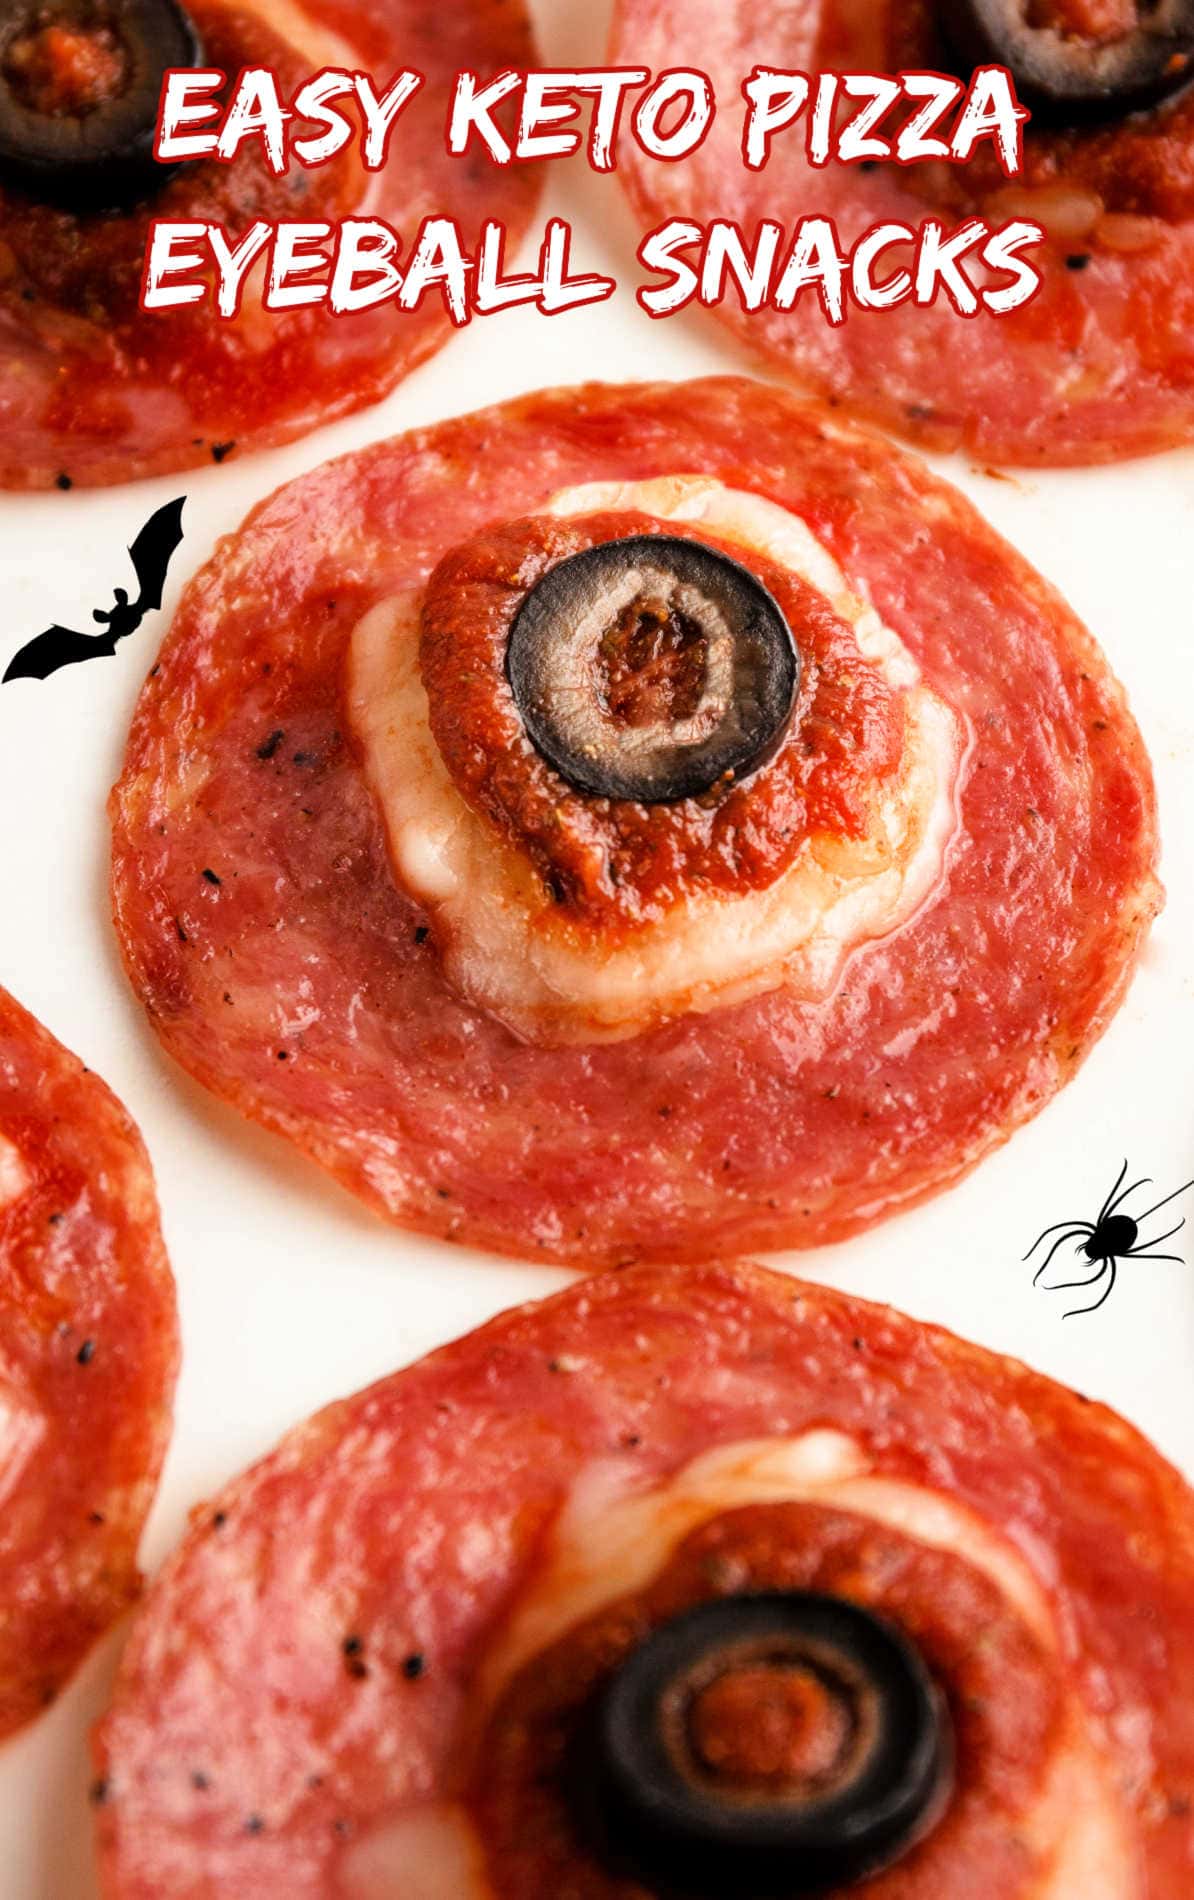 keto and paleo pizza eyeball snacks made with pepperoni and pizza toppings.